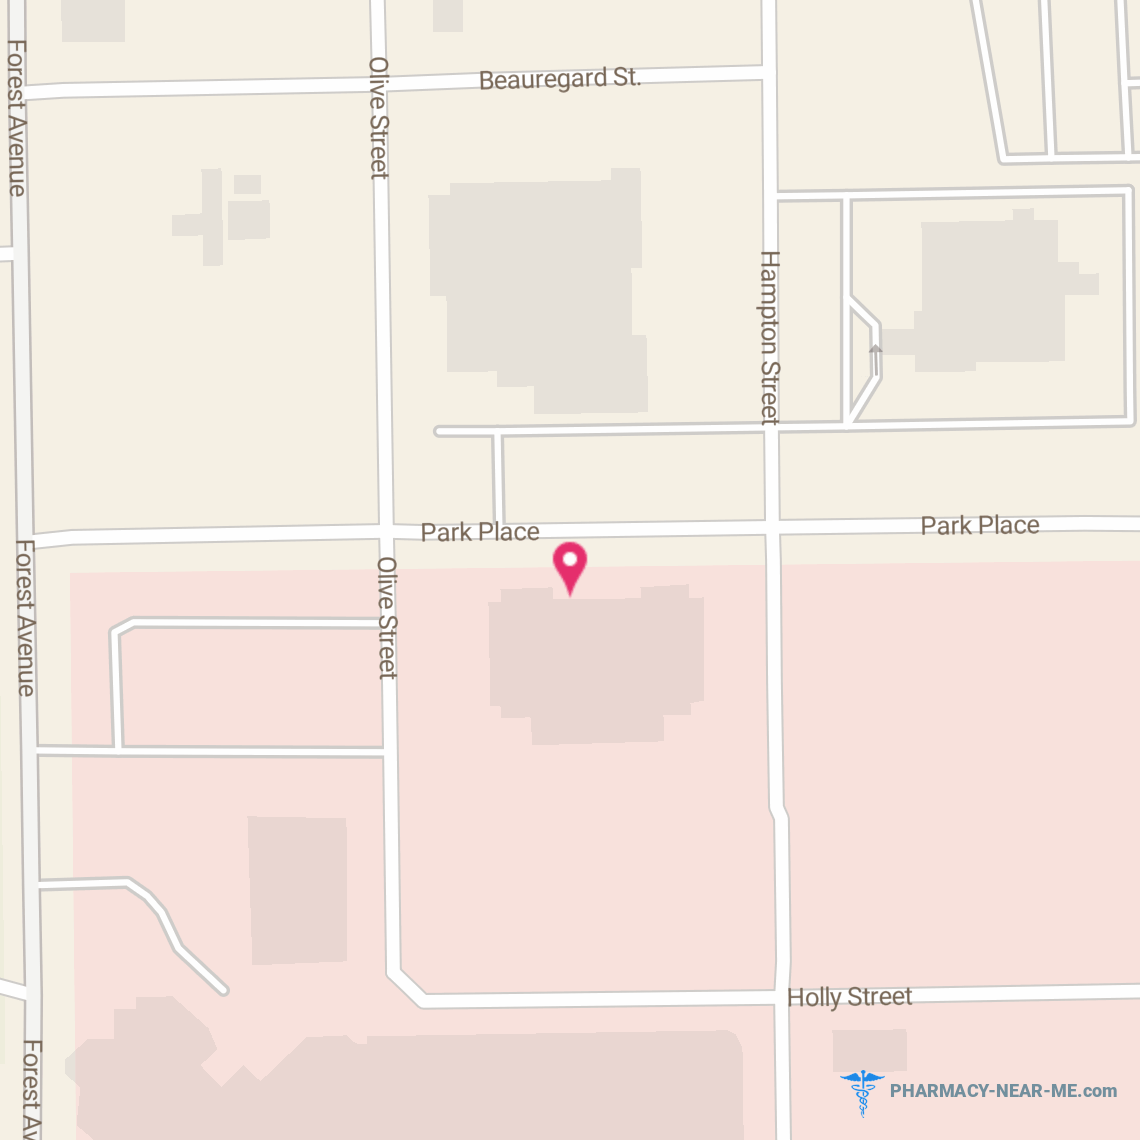 WALGREENS #15258 - Pharmacy Hours, Phone, Reviews & Information: 1758 Park Place, Montgomery, Alabama 36106, United States